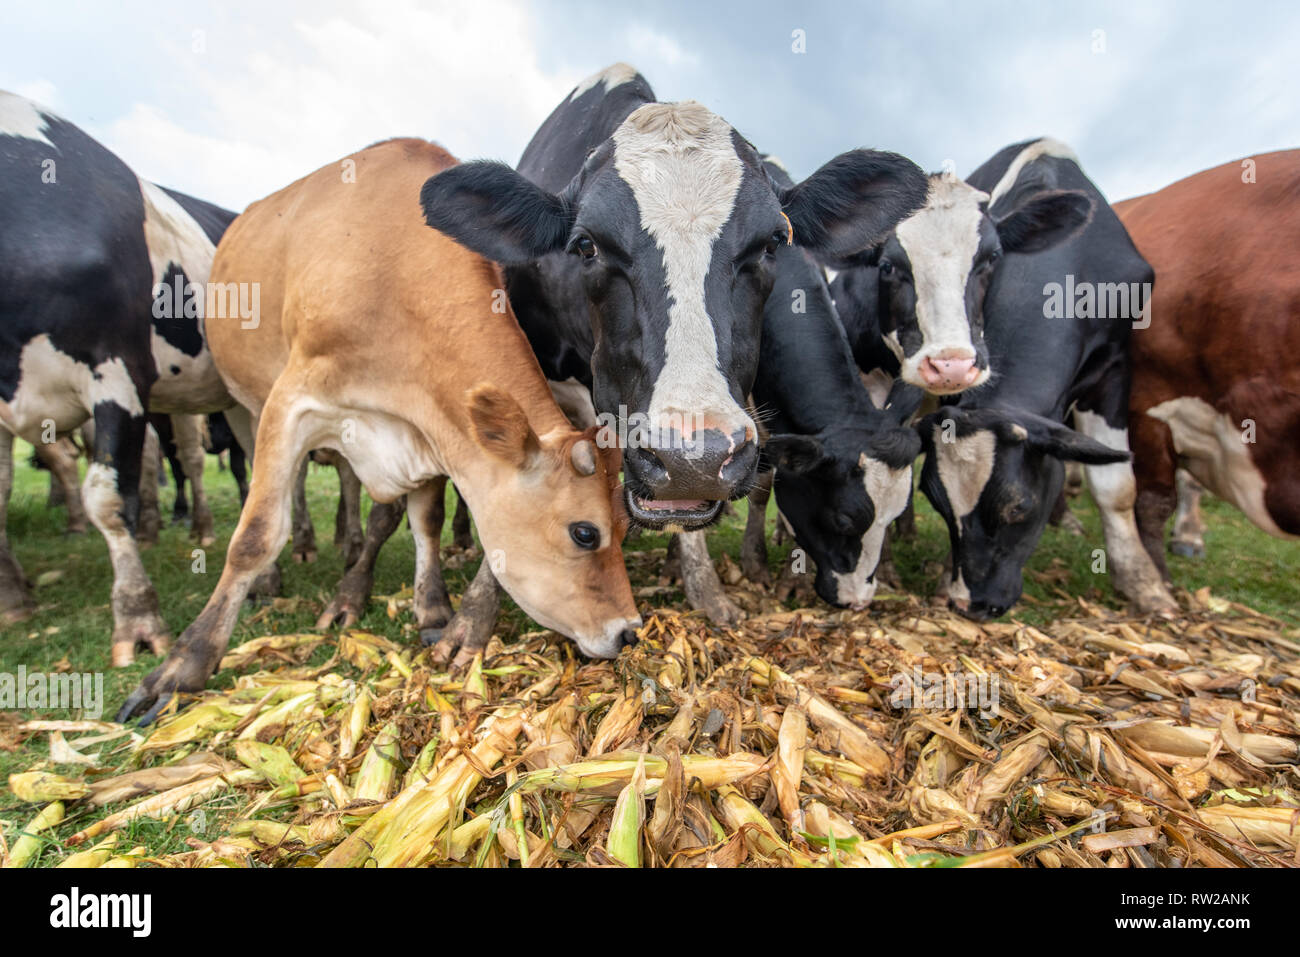 Low angle view of dairy cattle eating corn from pile, Pokomoke, Maryland Stock Photo